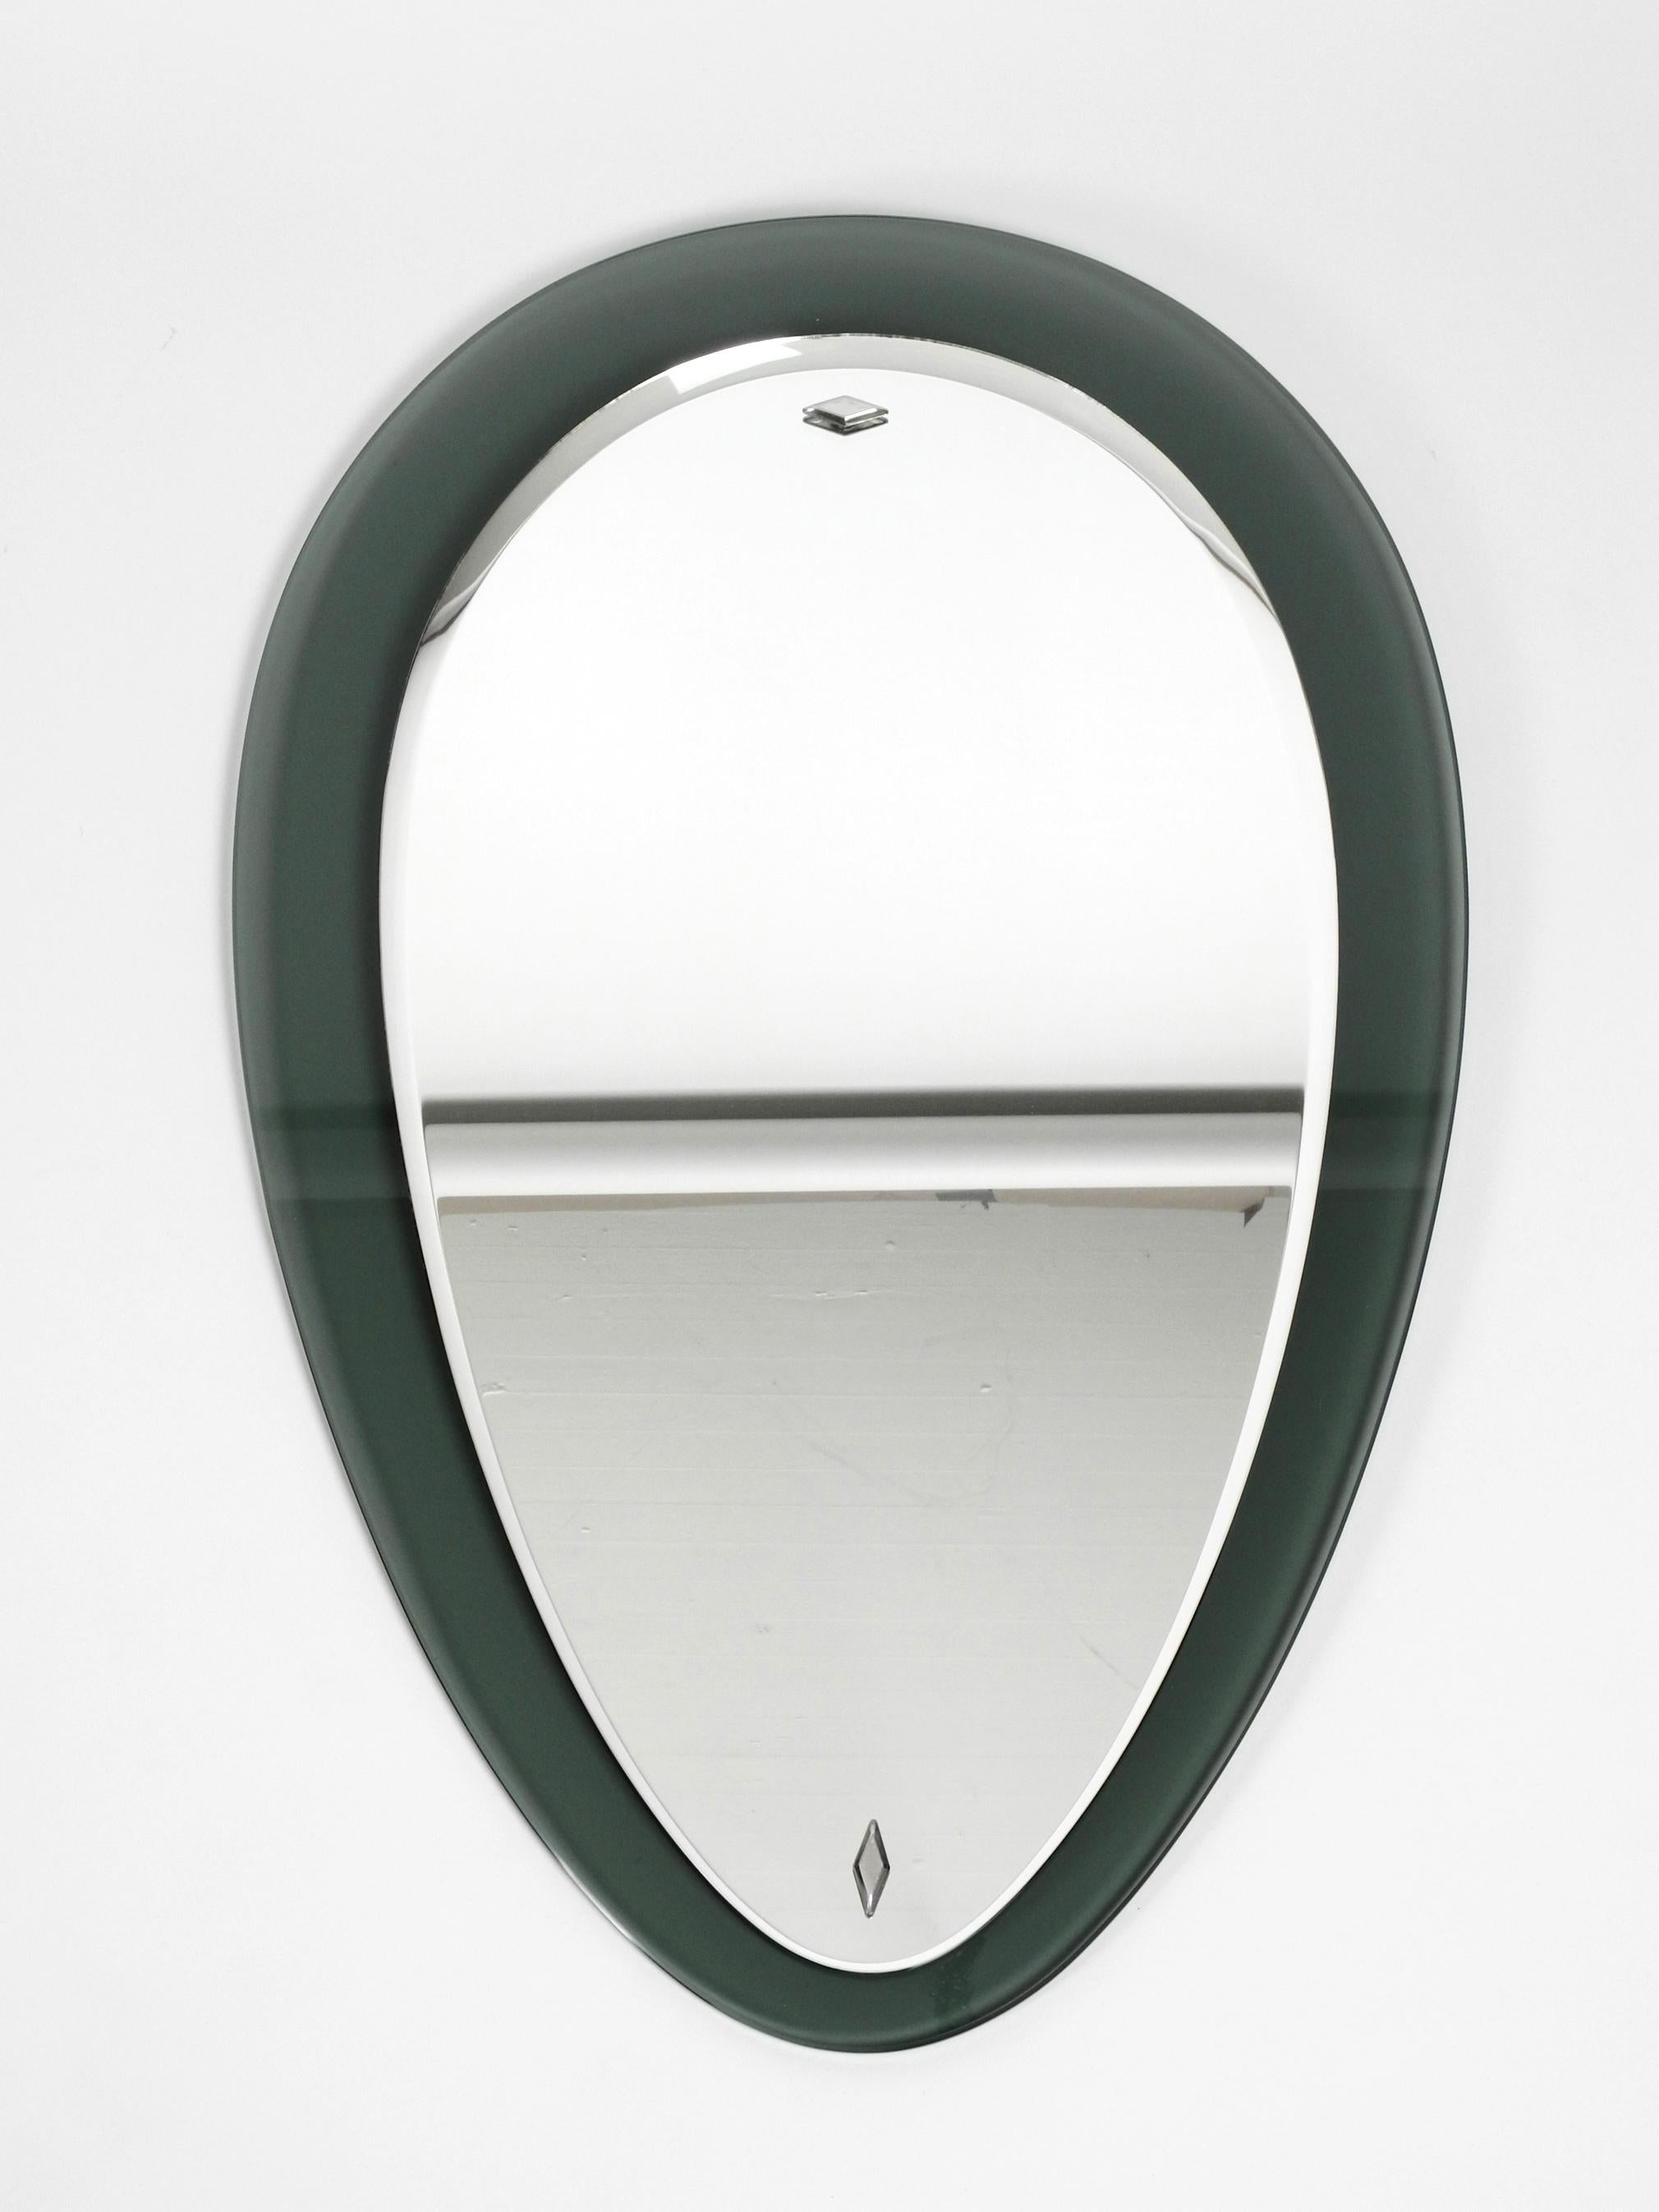 Beautiful large heavy midcentury double glass wall mirror.
Manufactured by Fontana Arte. Made in Italy.
Great design in the shape of a drop of water.
Very high quality and solid construction.
The mirror glass is screwed to the green transparent